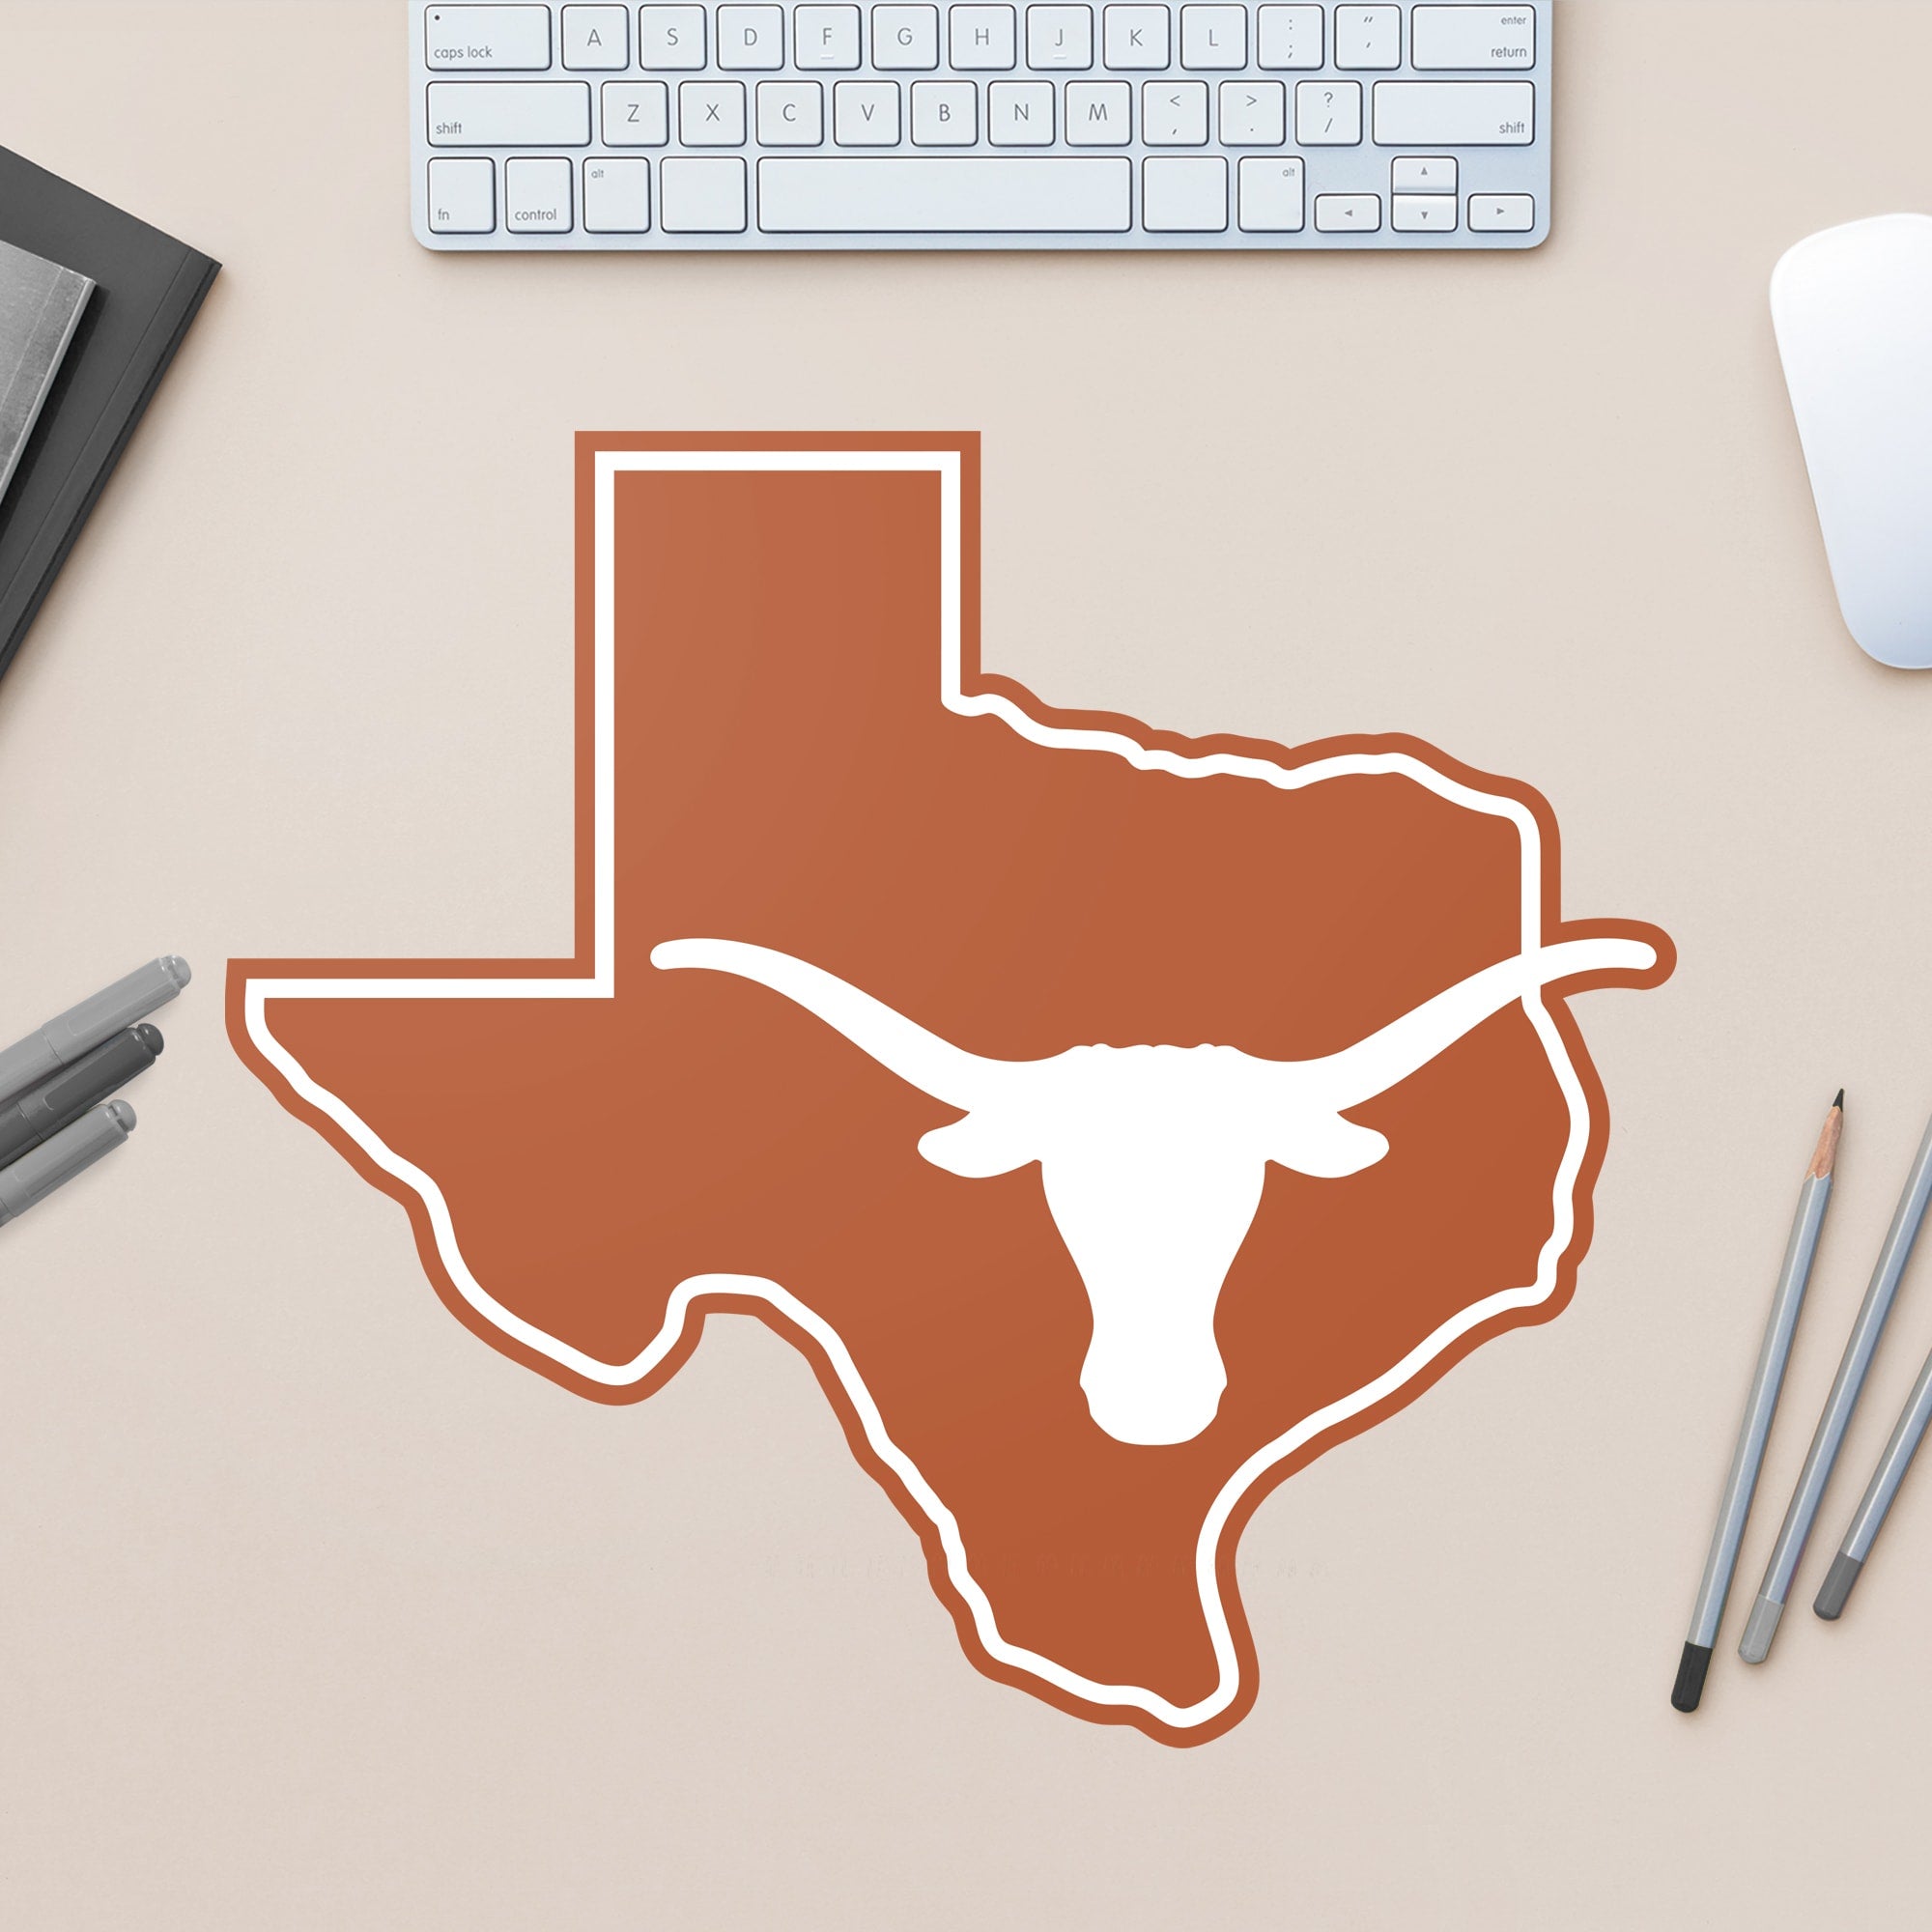 Texas Longhorns: State of Texas - Officially Licensed Removable Wall Decal Large by Fathead | Vinyl